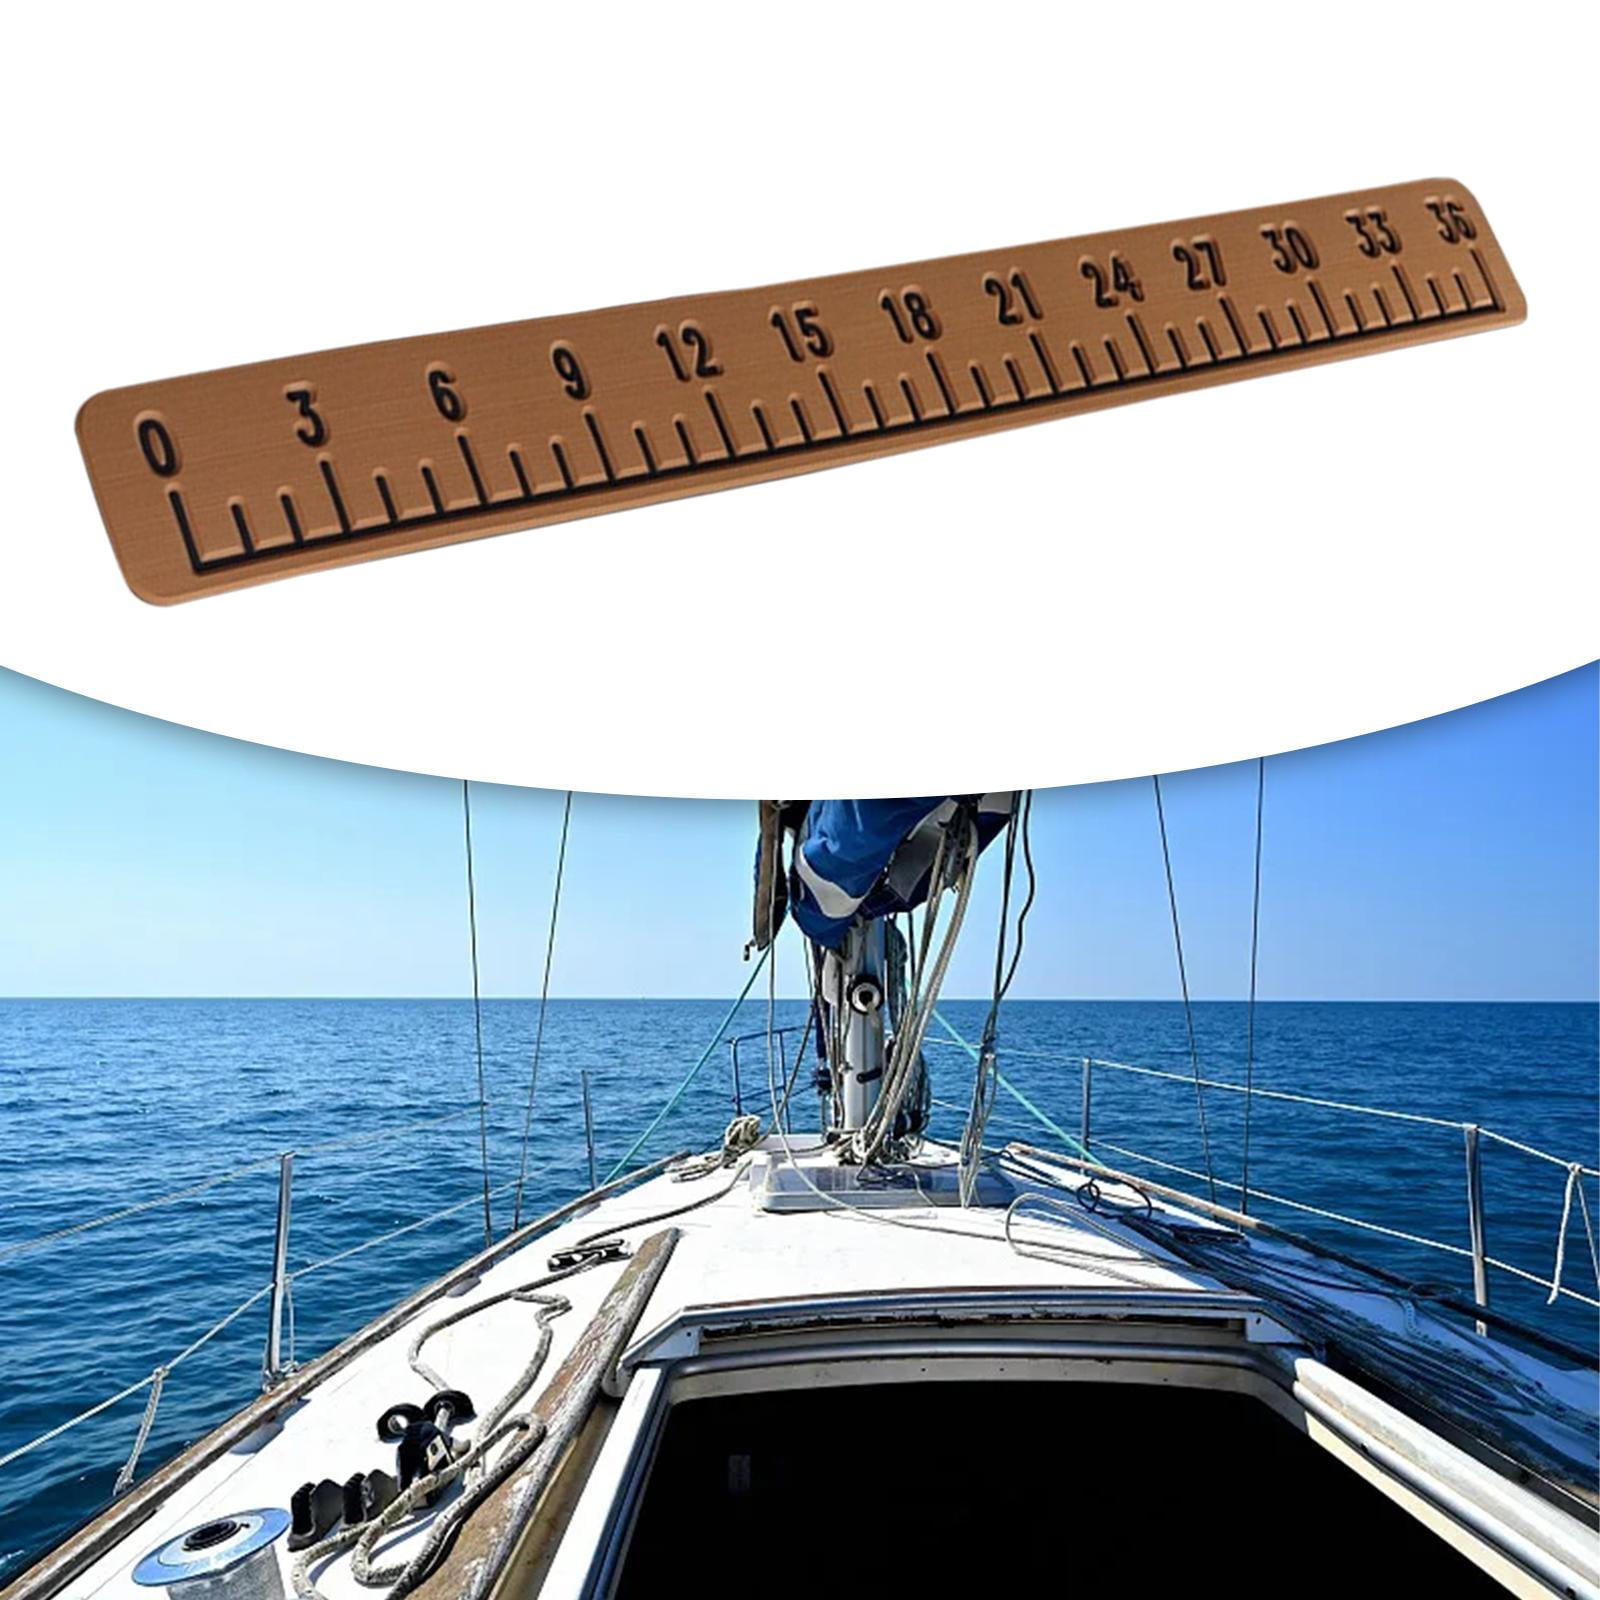 Fish Ruler for Boat Measurement Sticker Tool with Adhesive Backing EVA 6mm  Thickness Accurate Fish Measuring Ruler for Fishing Boat Accessories light  gray black 